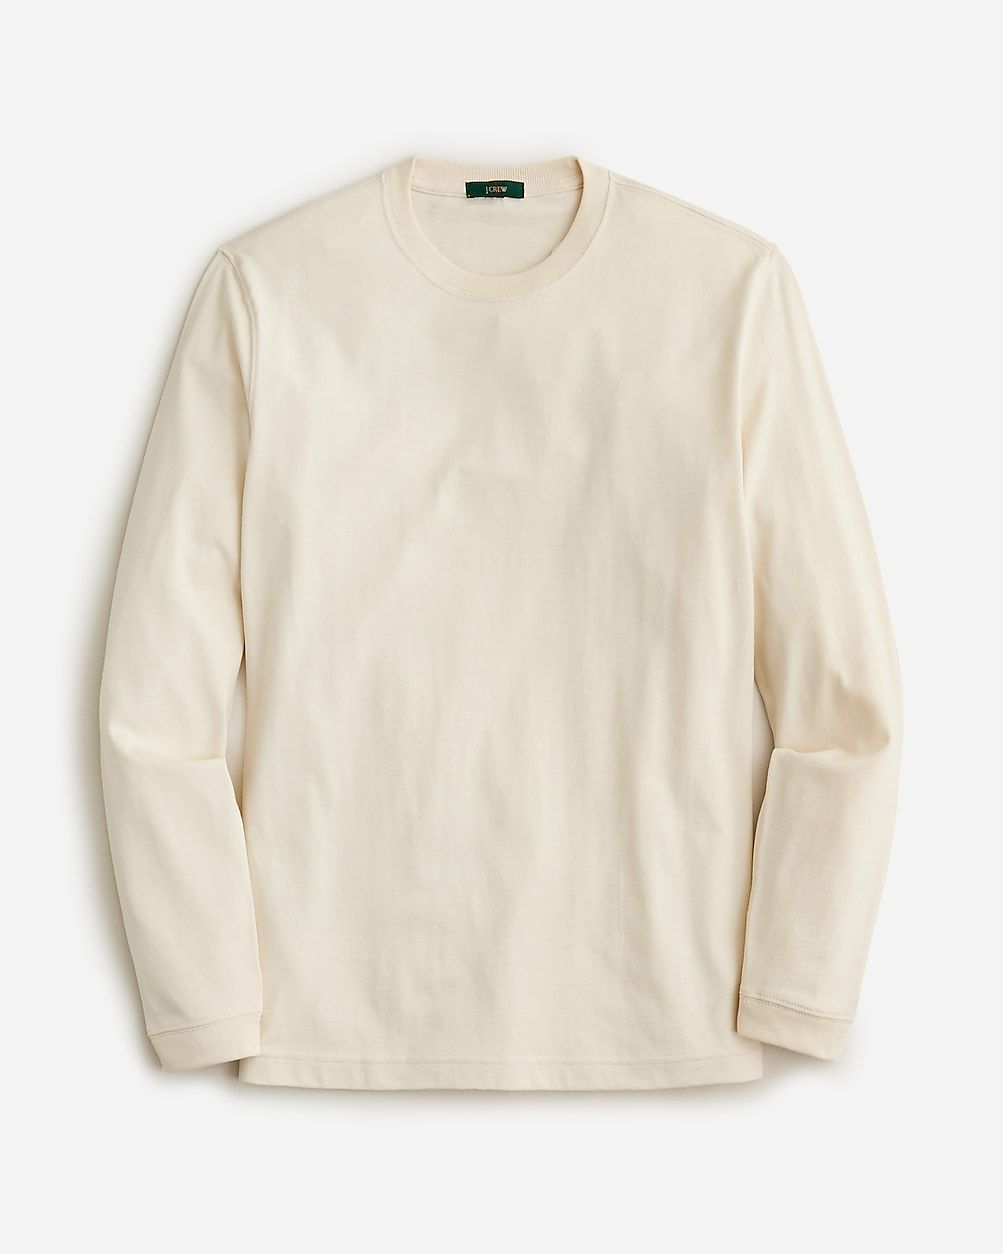 Relaxed long-sleeve premium-weight cotton T-shirt | J.Crew US